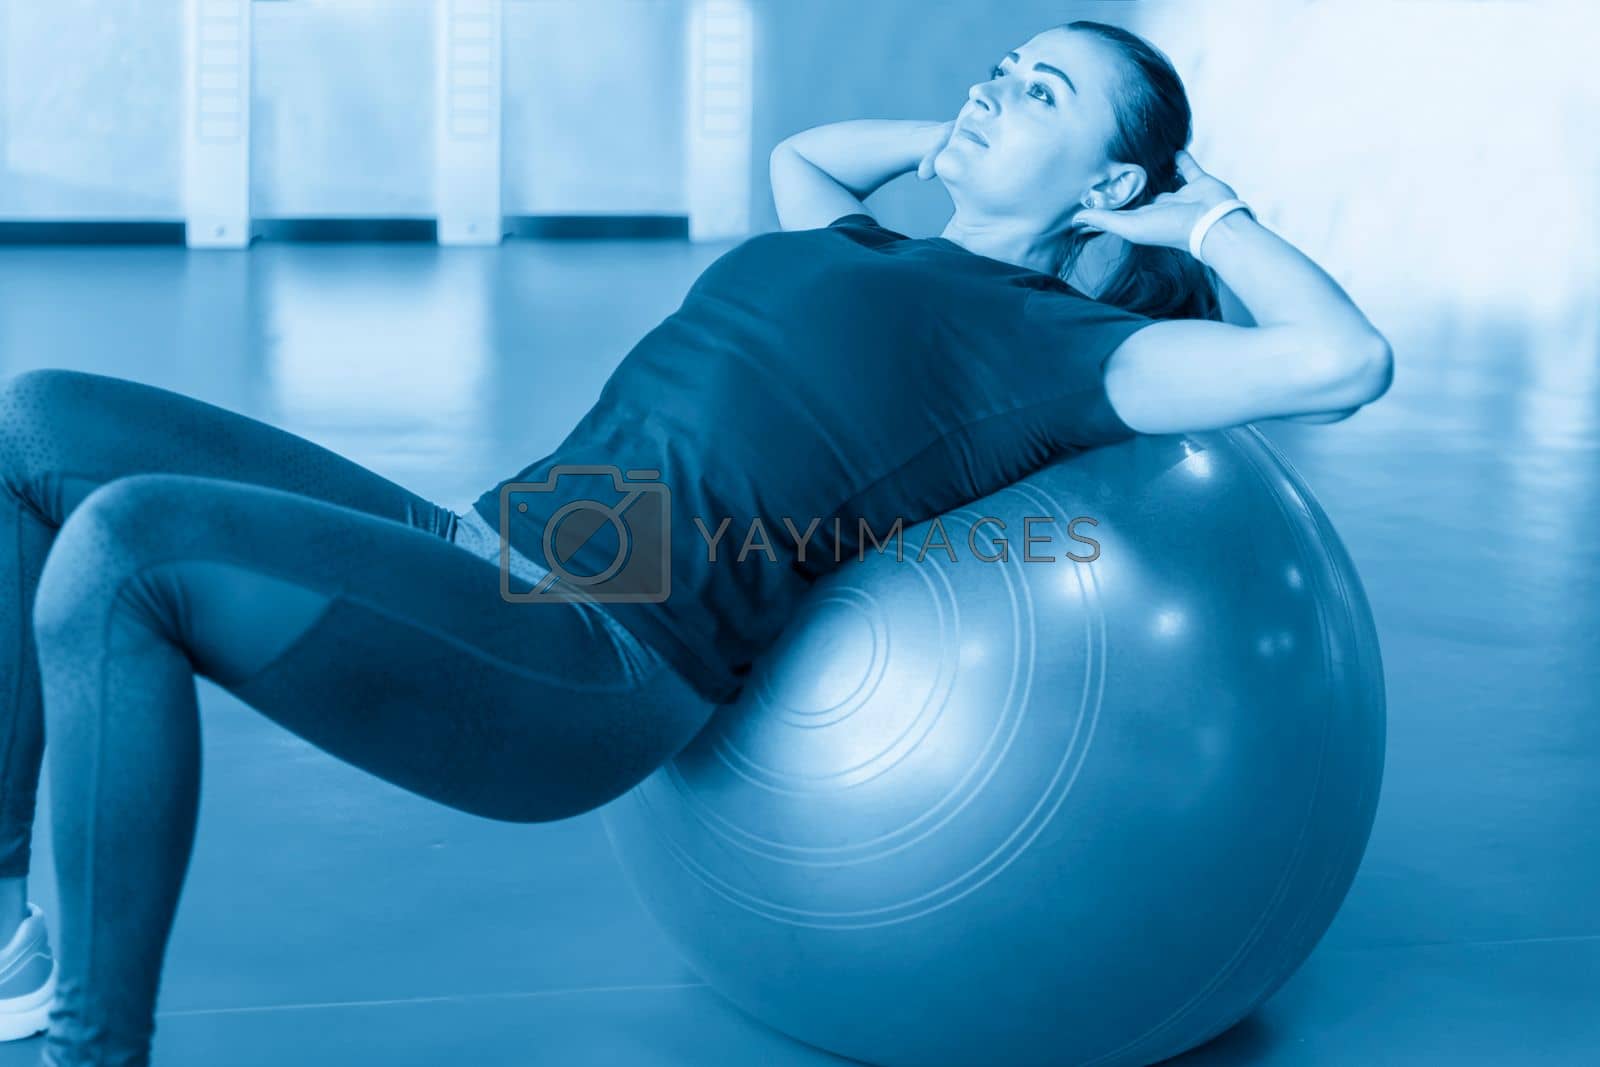 Royalty free image of Woman at the gym doing exercises with pilates ball on her back by Mariakray